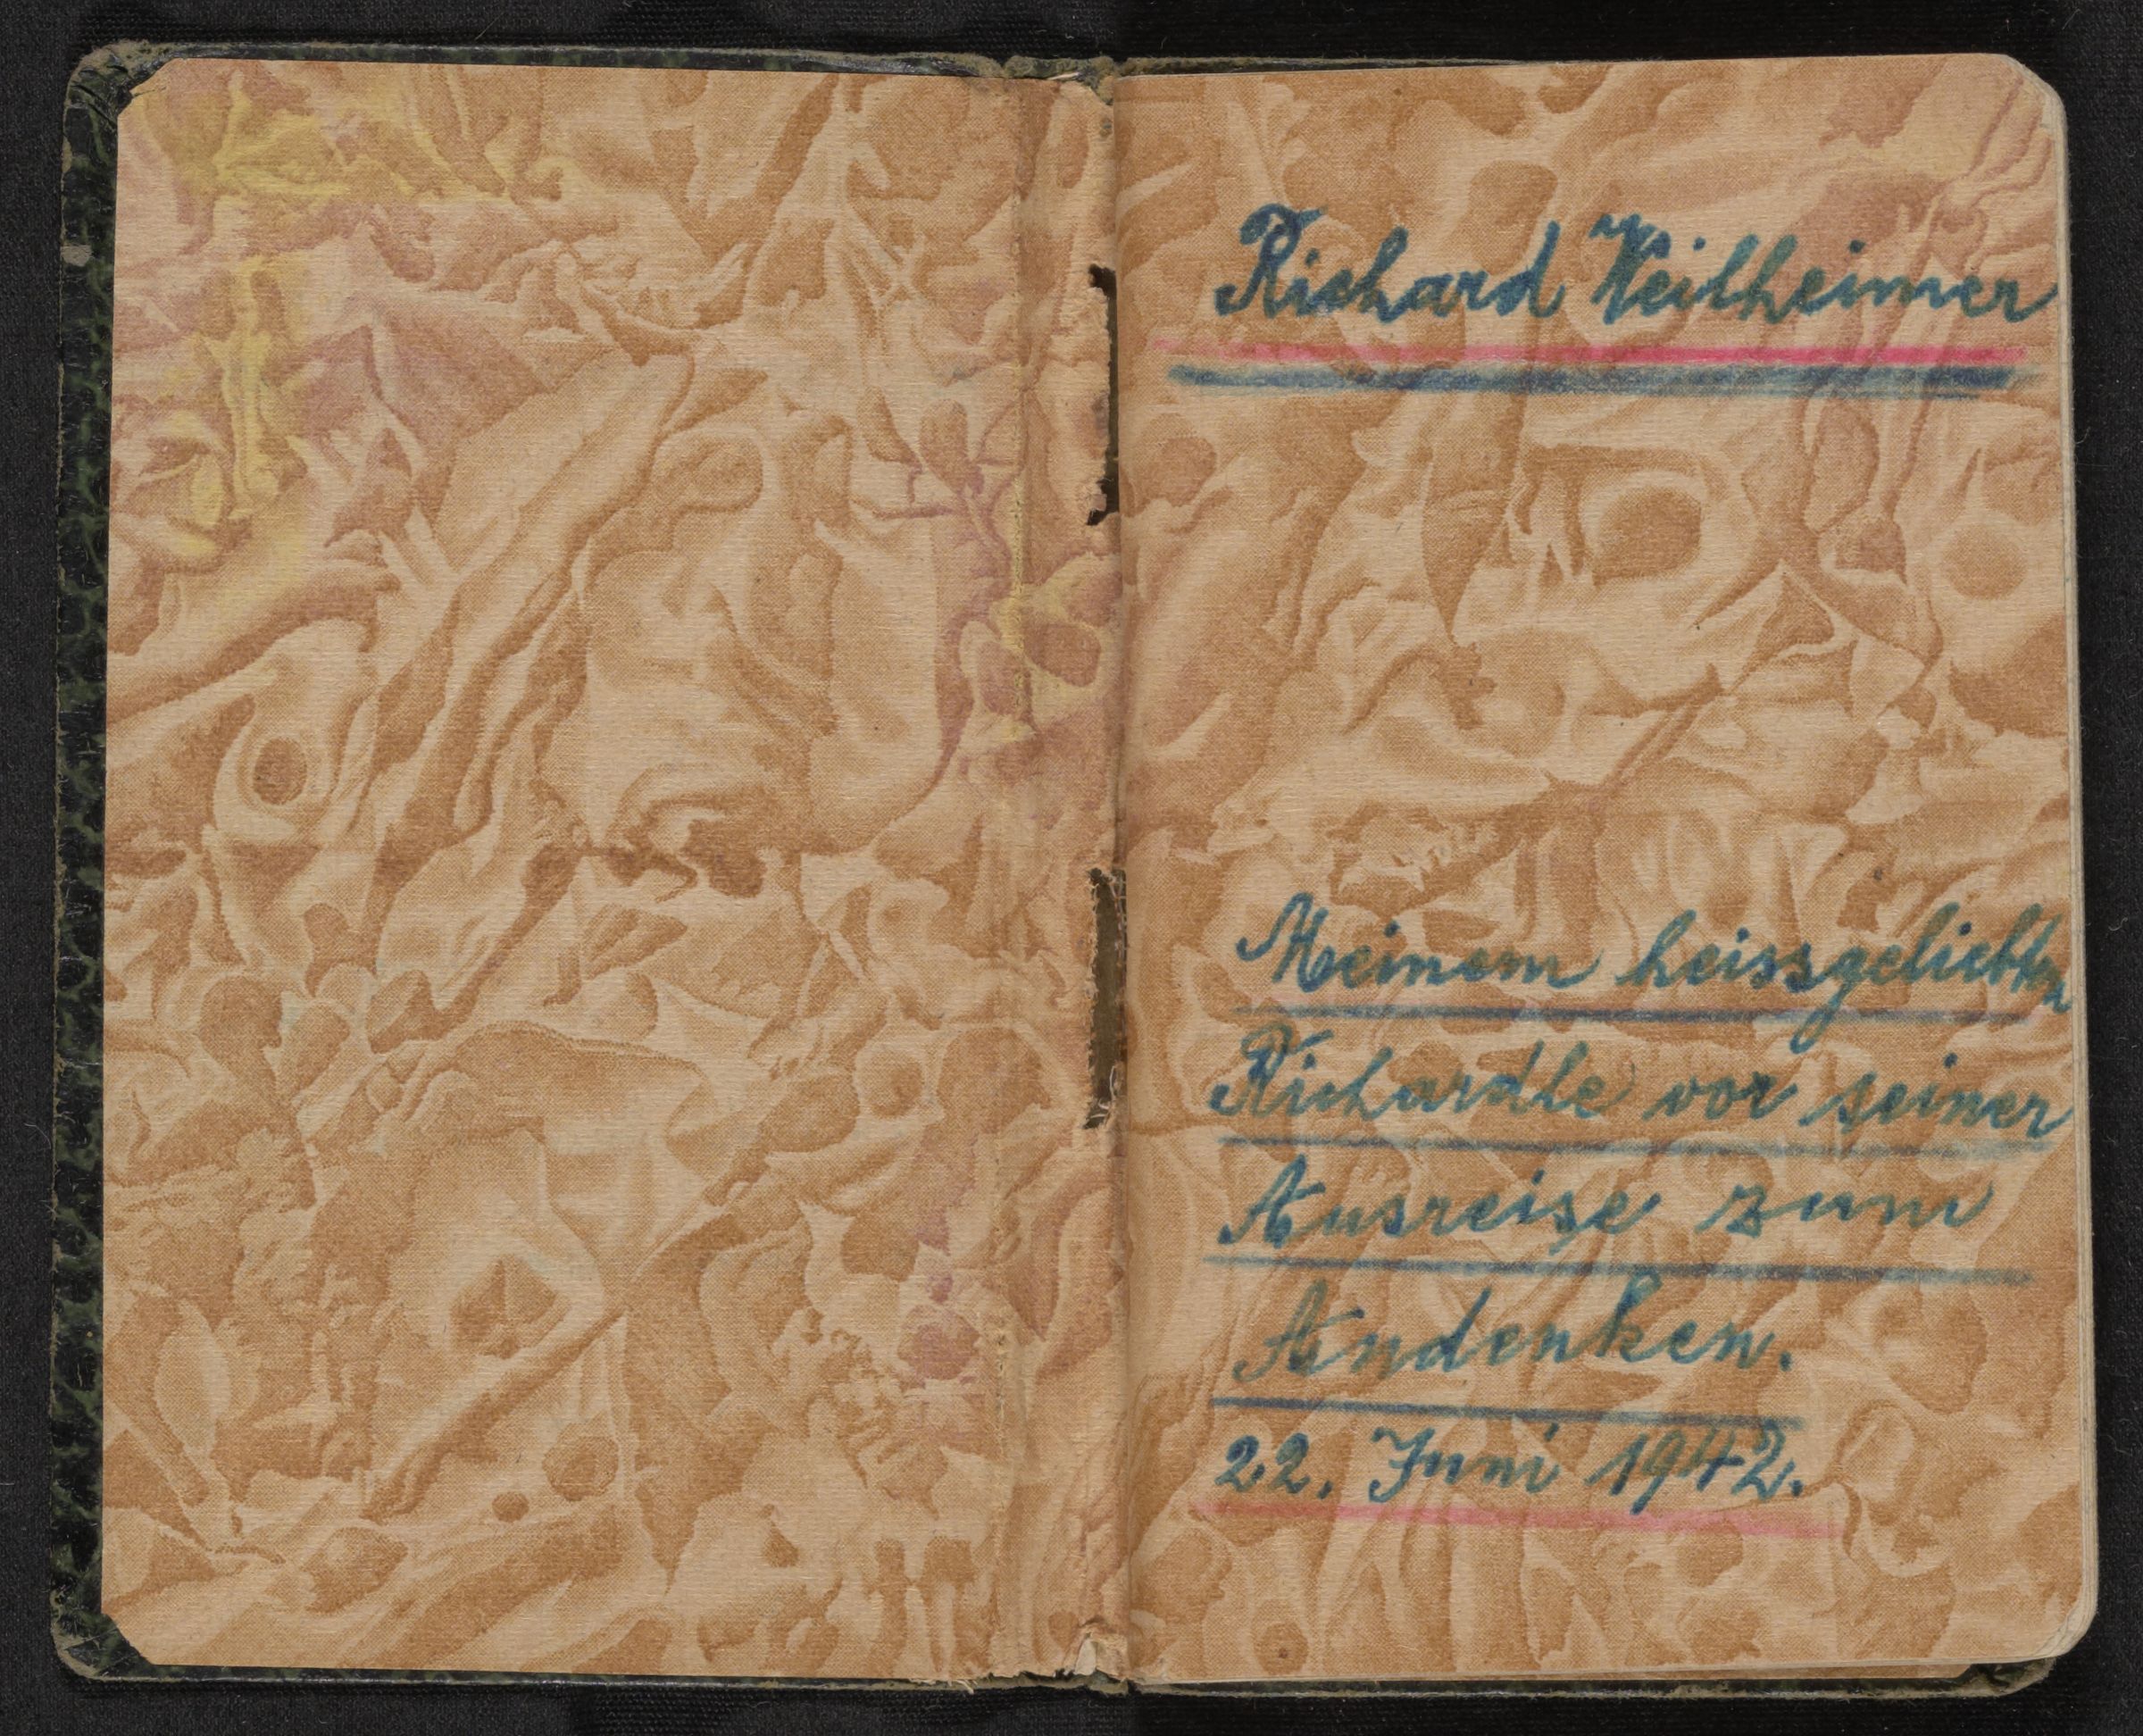 Richard Weilheimer received this address book as a gift from his father before fleeing Europe to escape Nazi persecution.